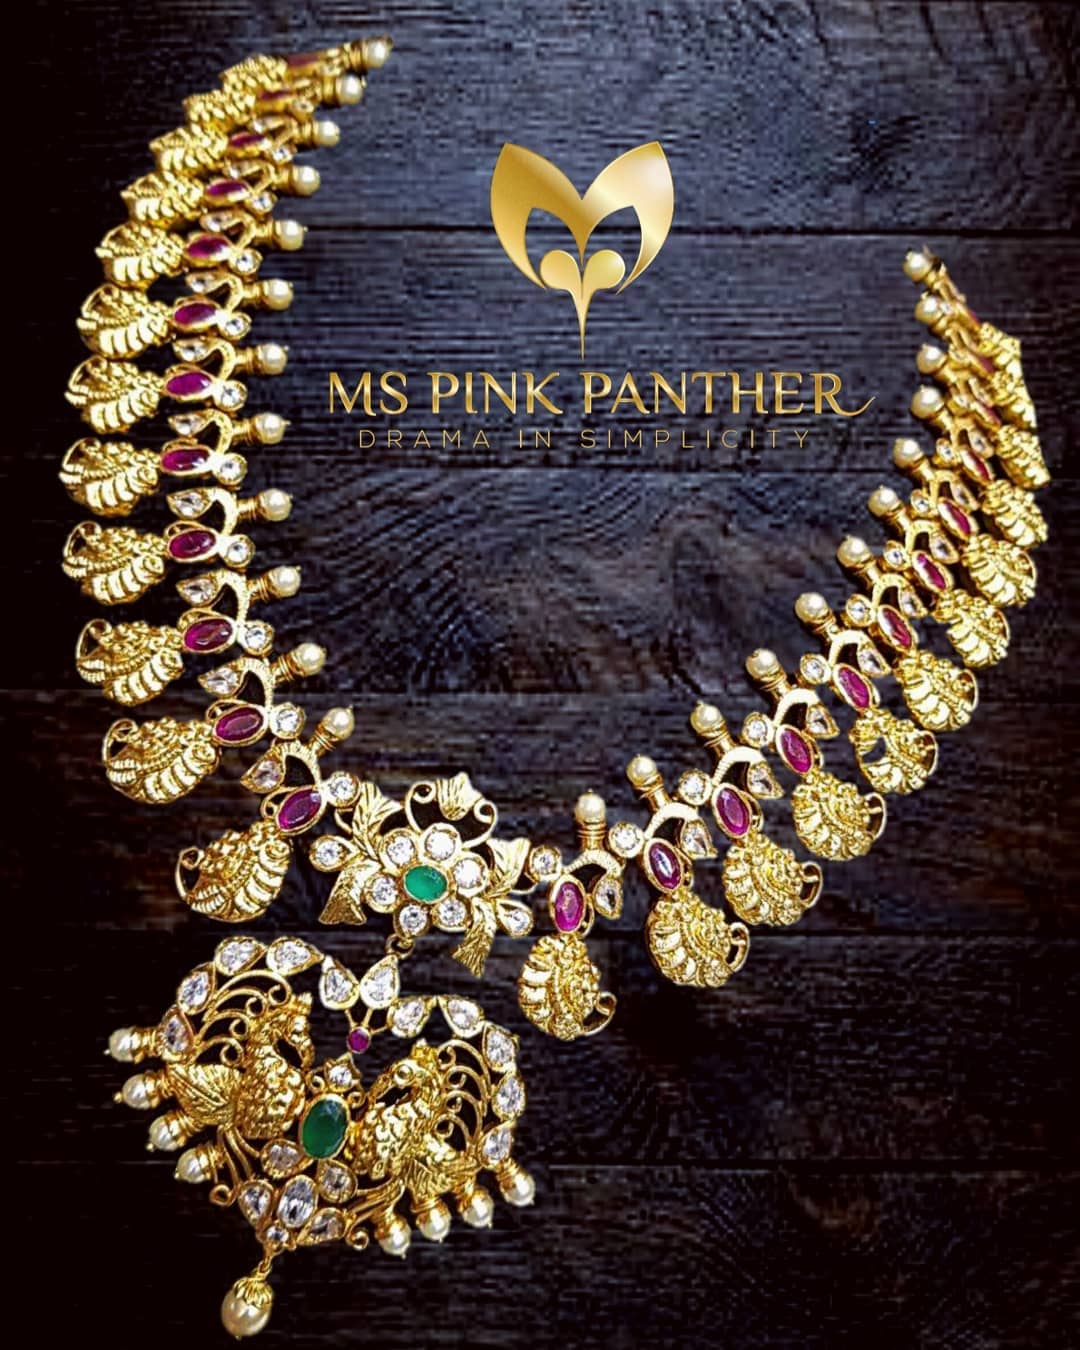 Attractive Imitation Necklace From Ms Pink Panthers